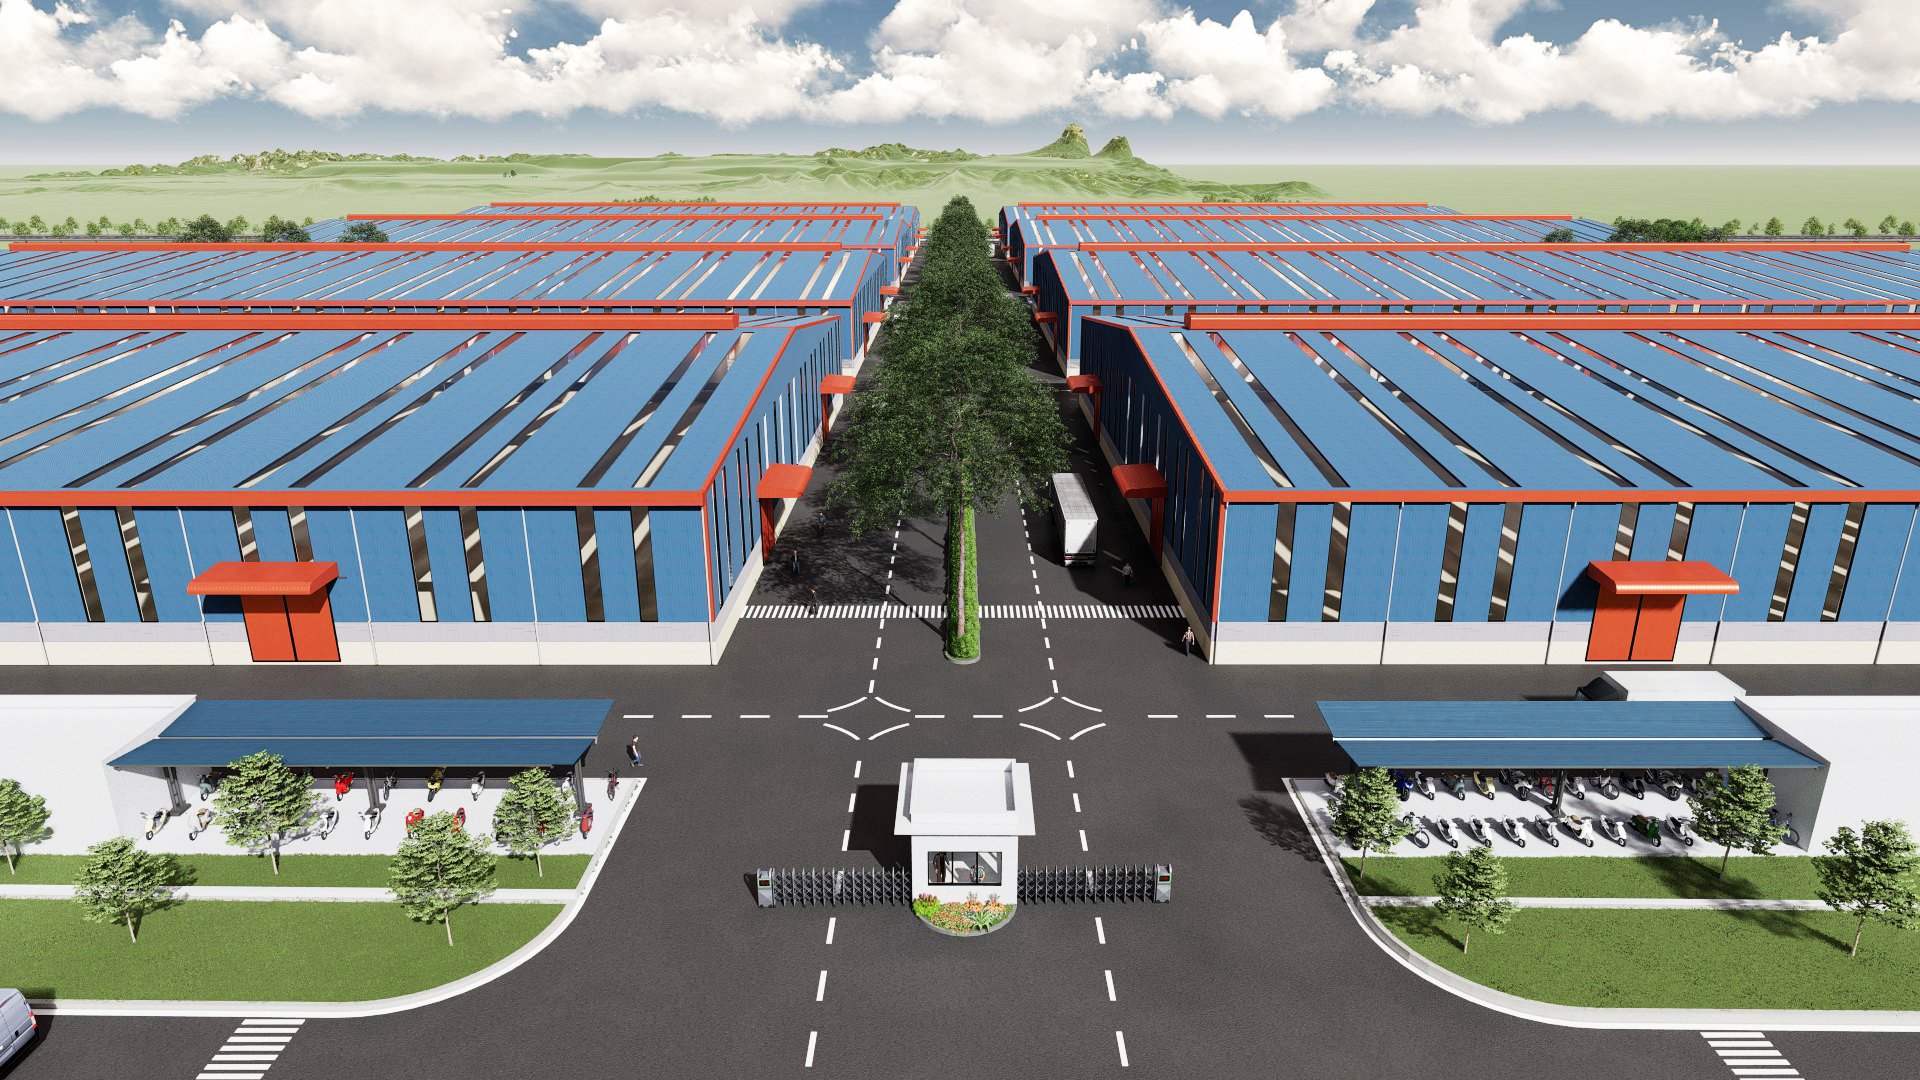 KIM TIN WAS GRANTED AN INVESTMENT CERTIFICATE FOR A FACTORY FOR LEASE OF 135,216 M2 IN THAI NGUYEN INDUSTRIAL PARK